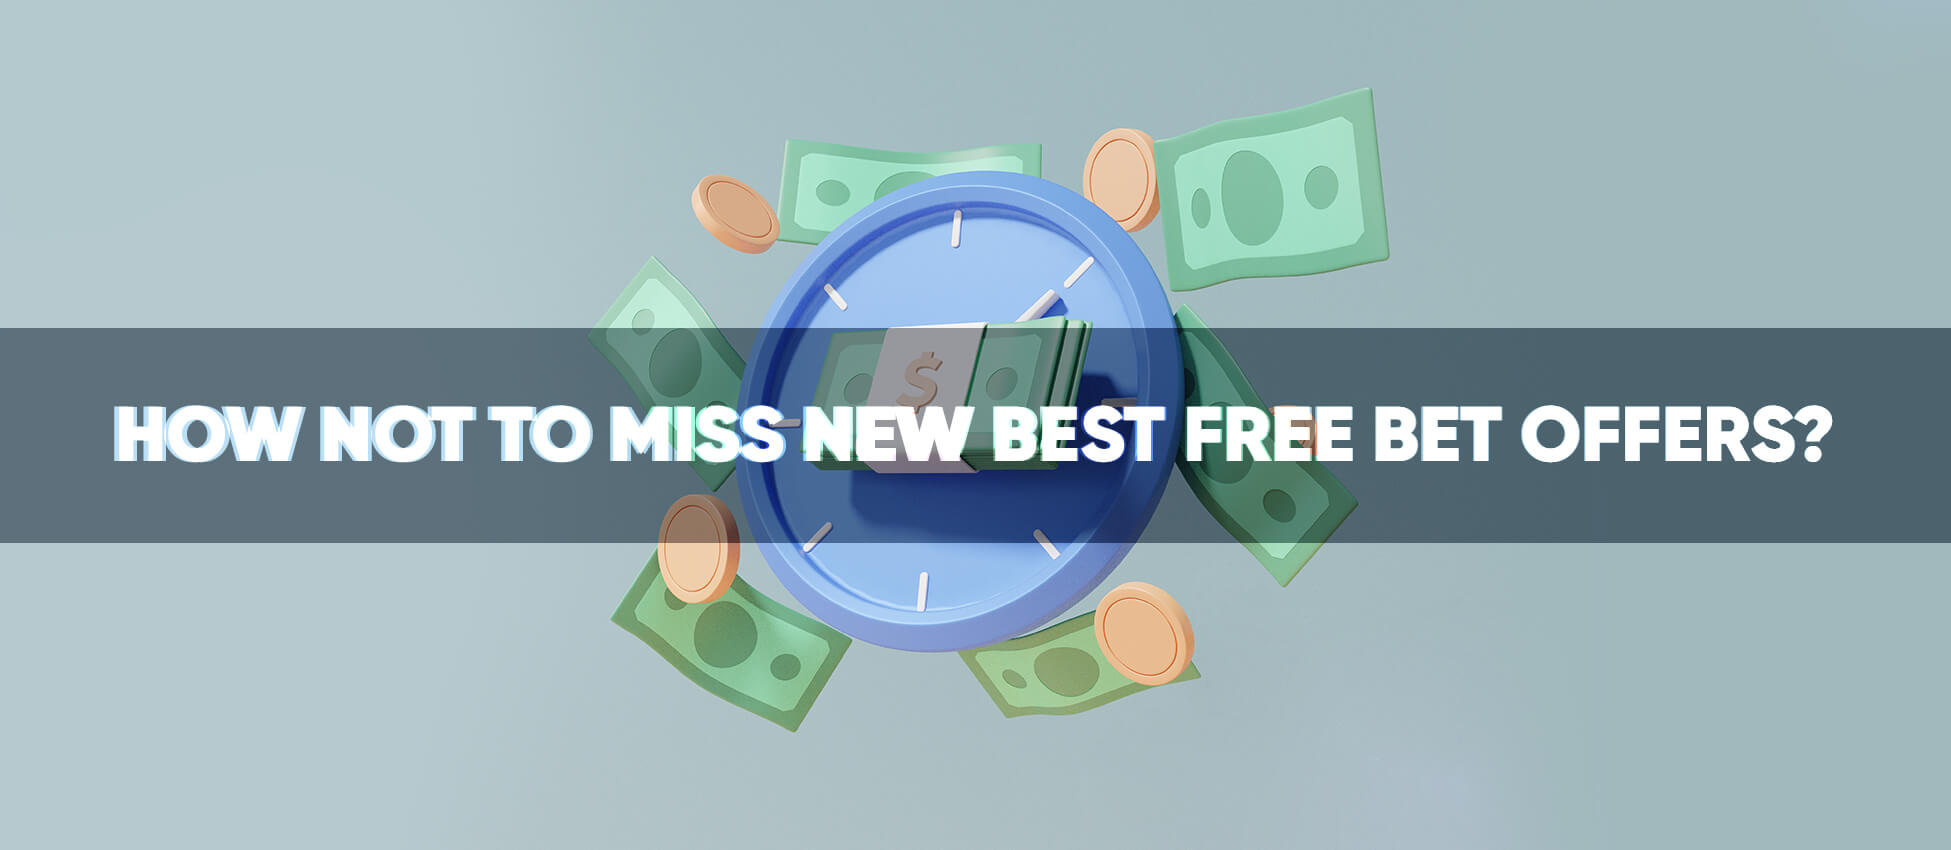 How not to miss new best free bet offers?